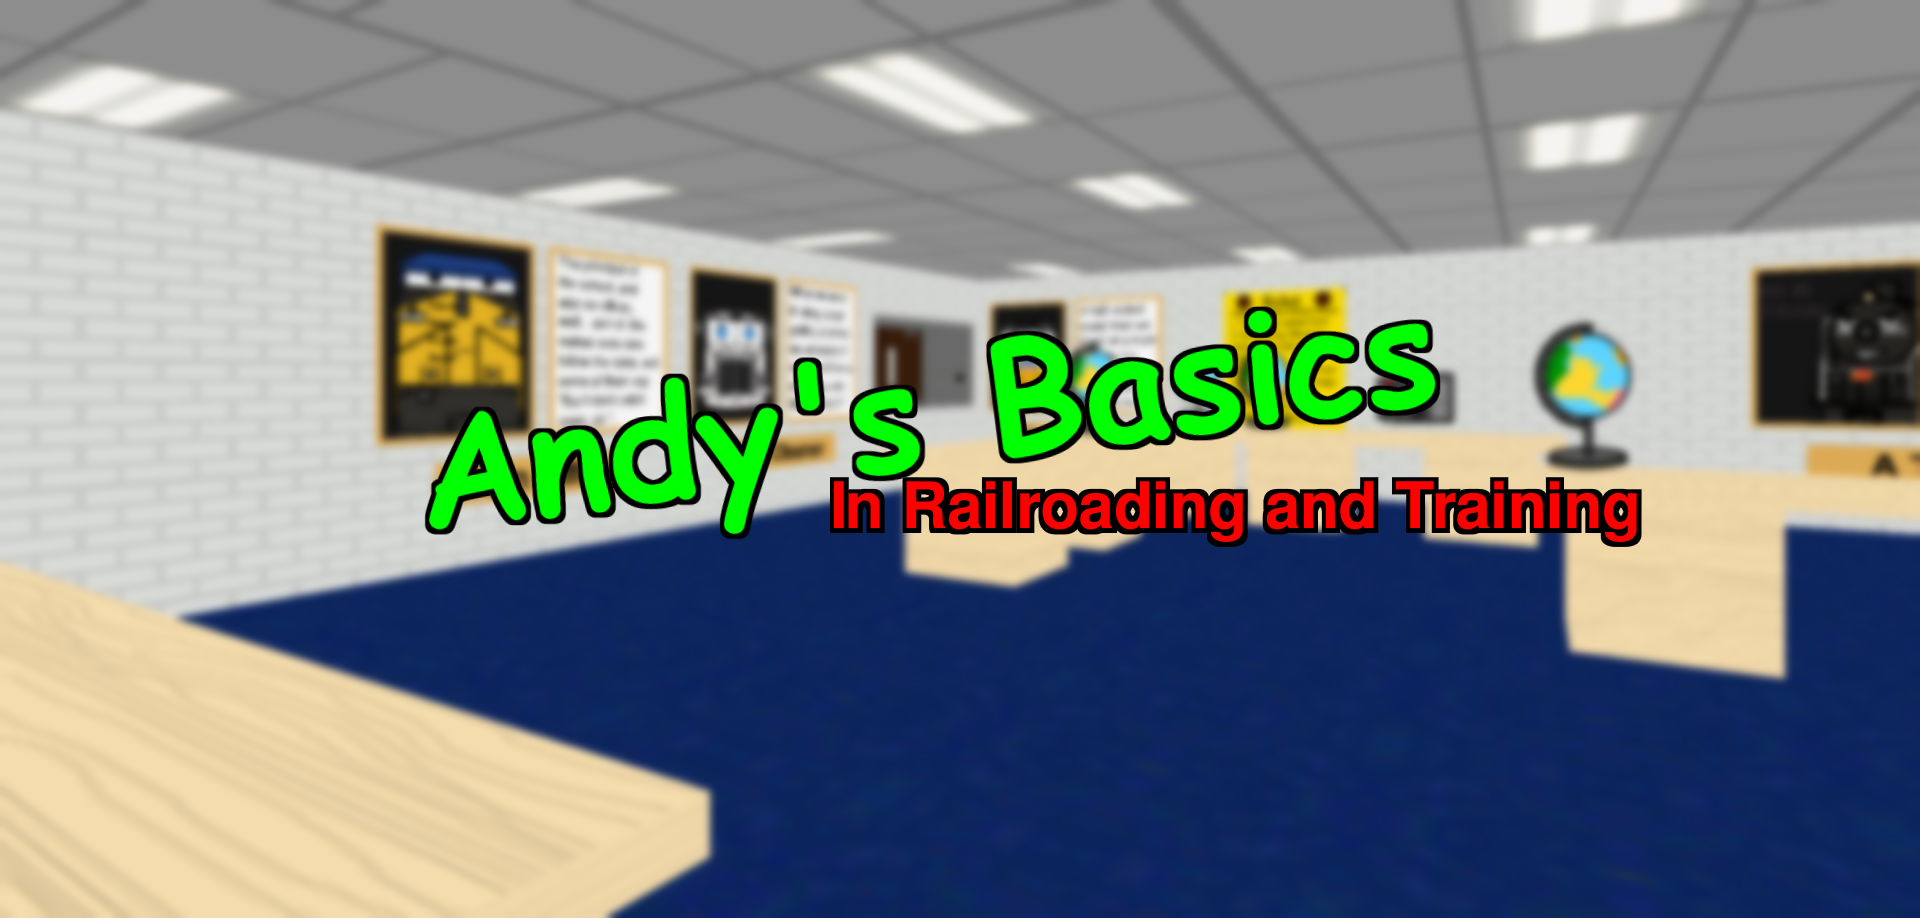 Andy's Basics In Railroading and Training (Remastered)